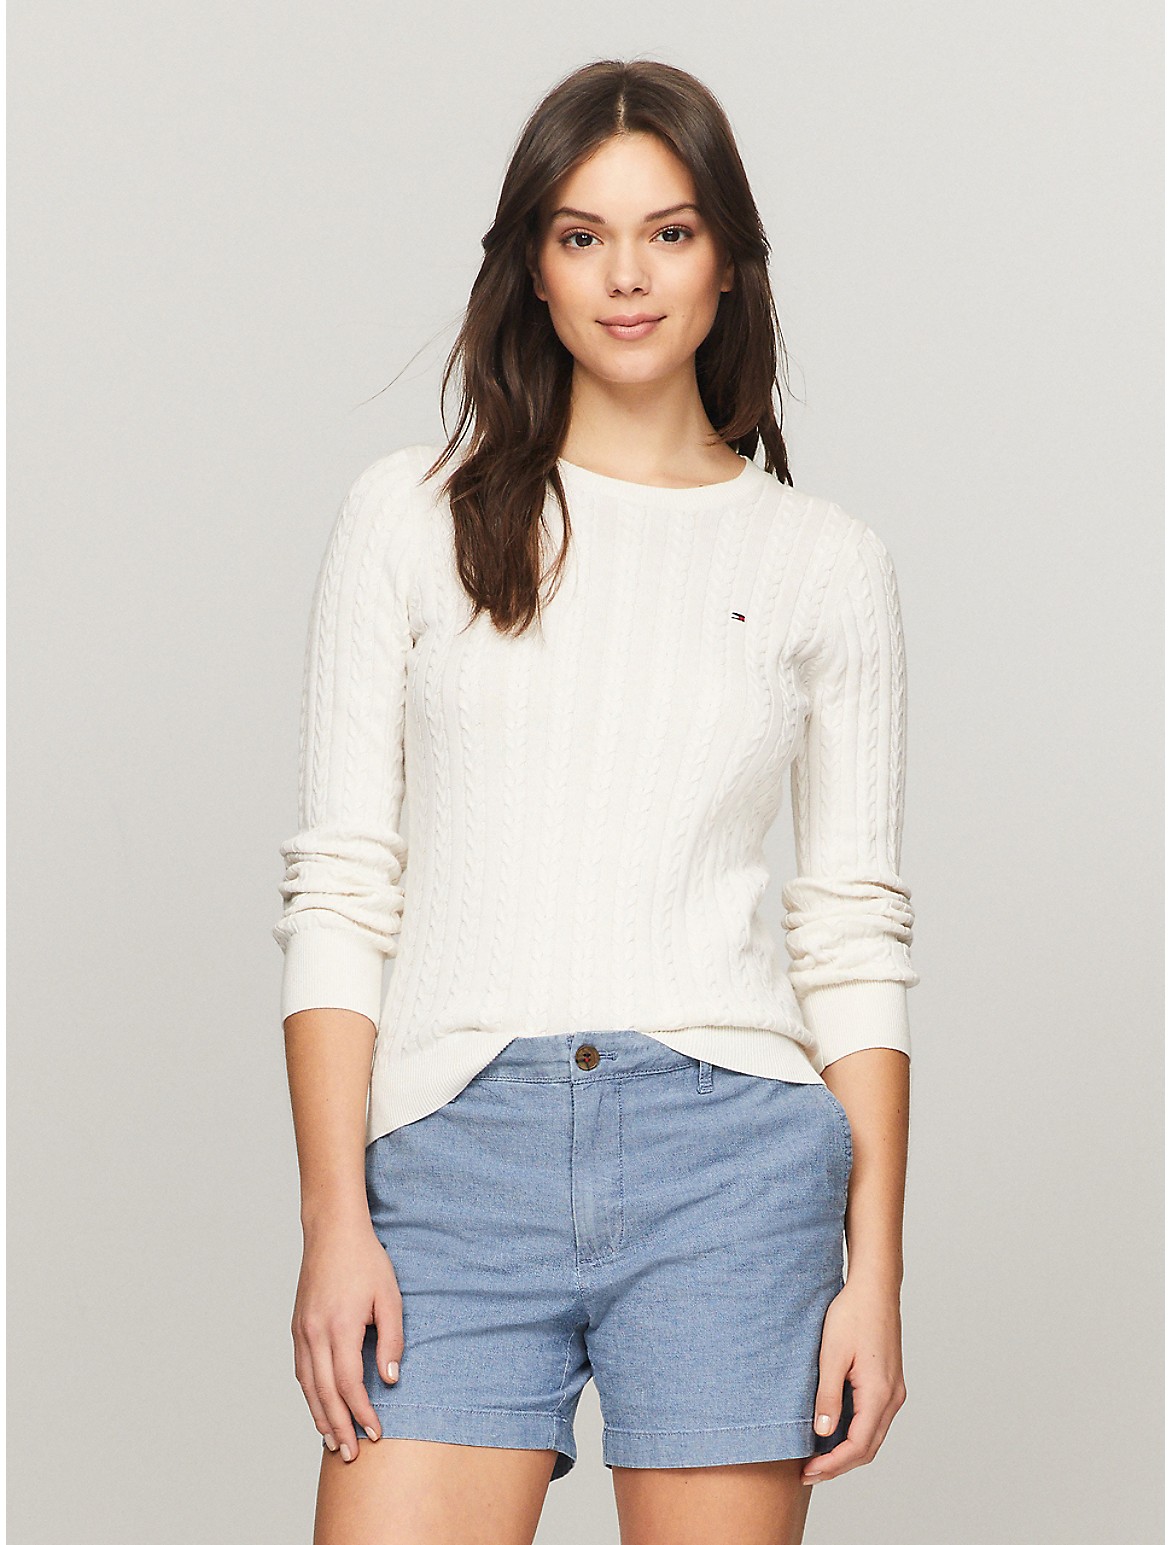 Tommy Hilfiger Women's Cable Knit Sweater